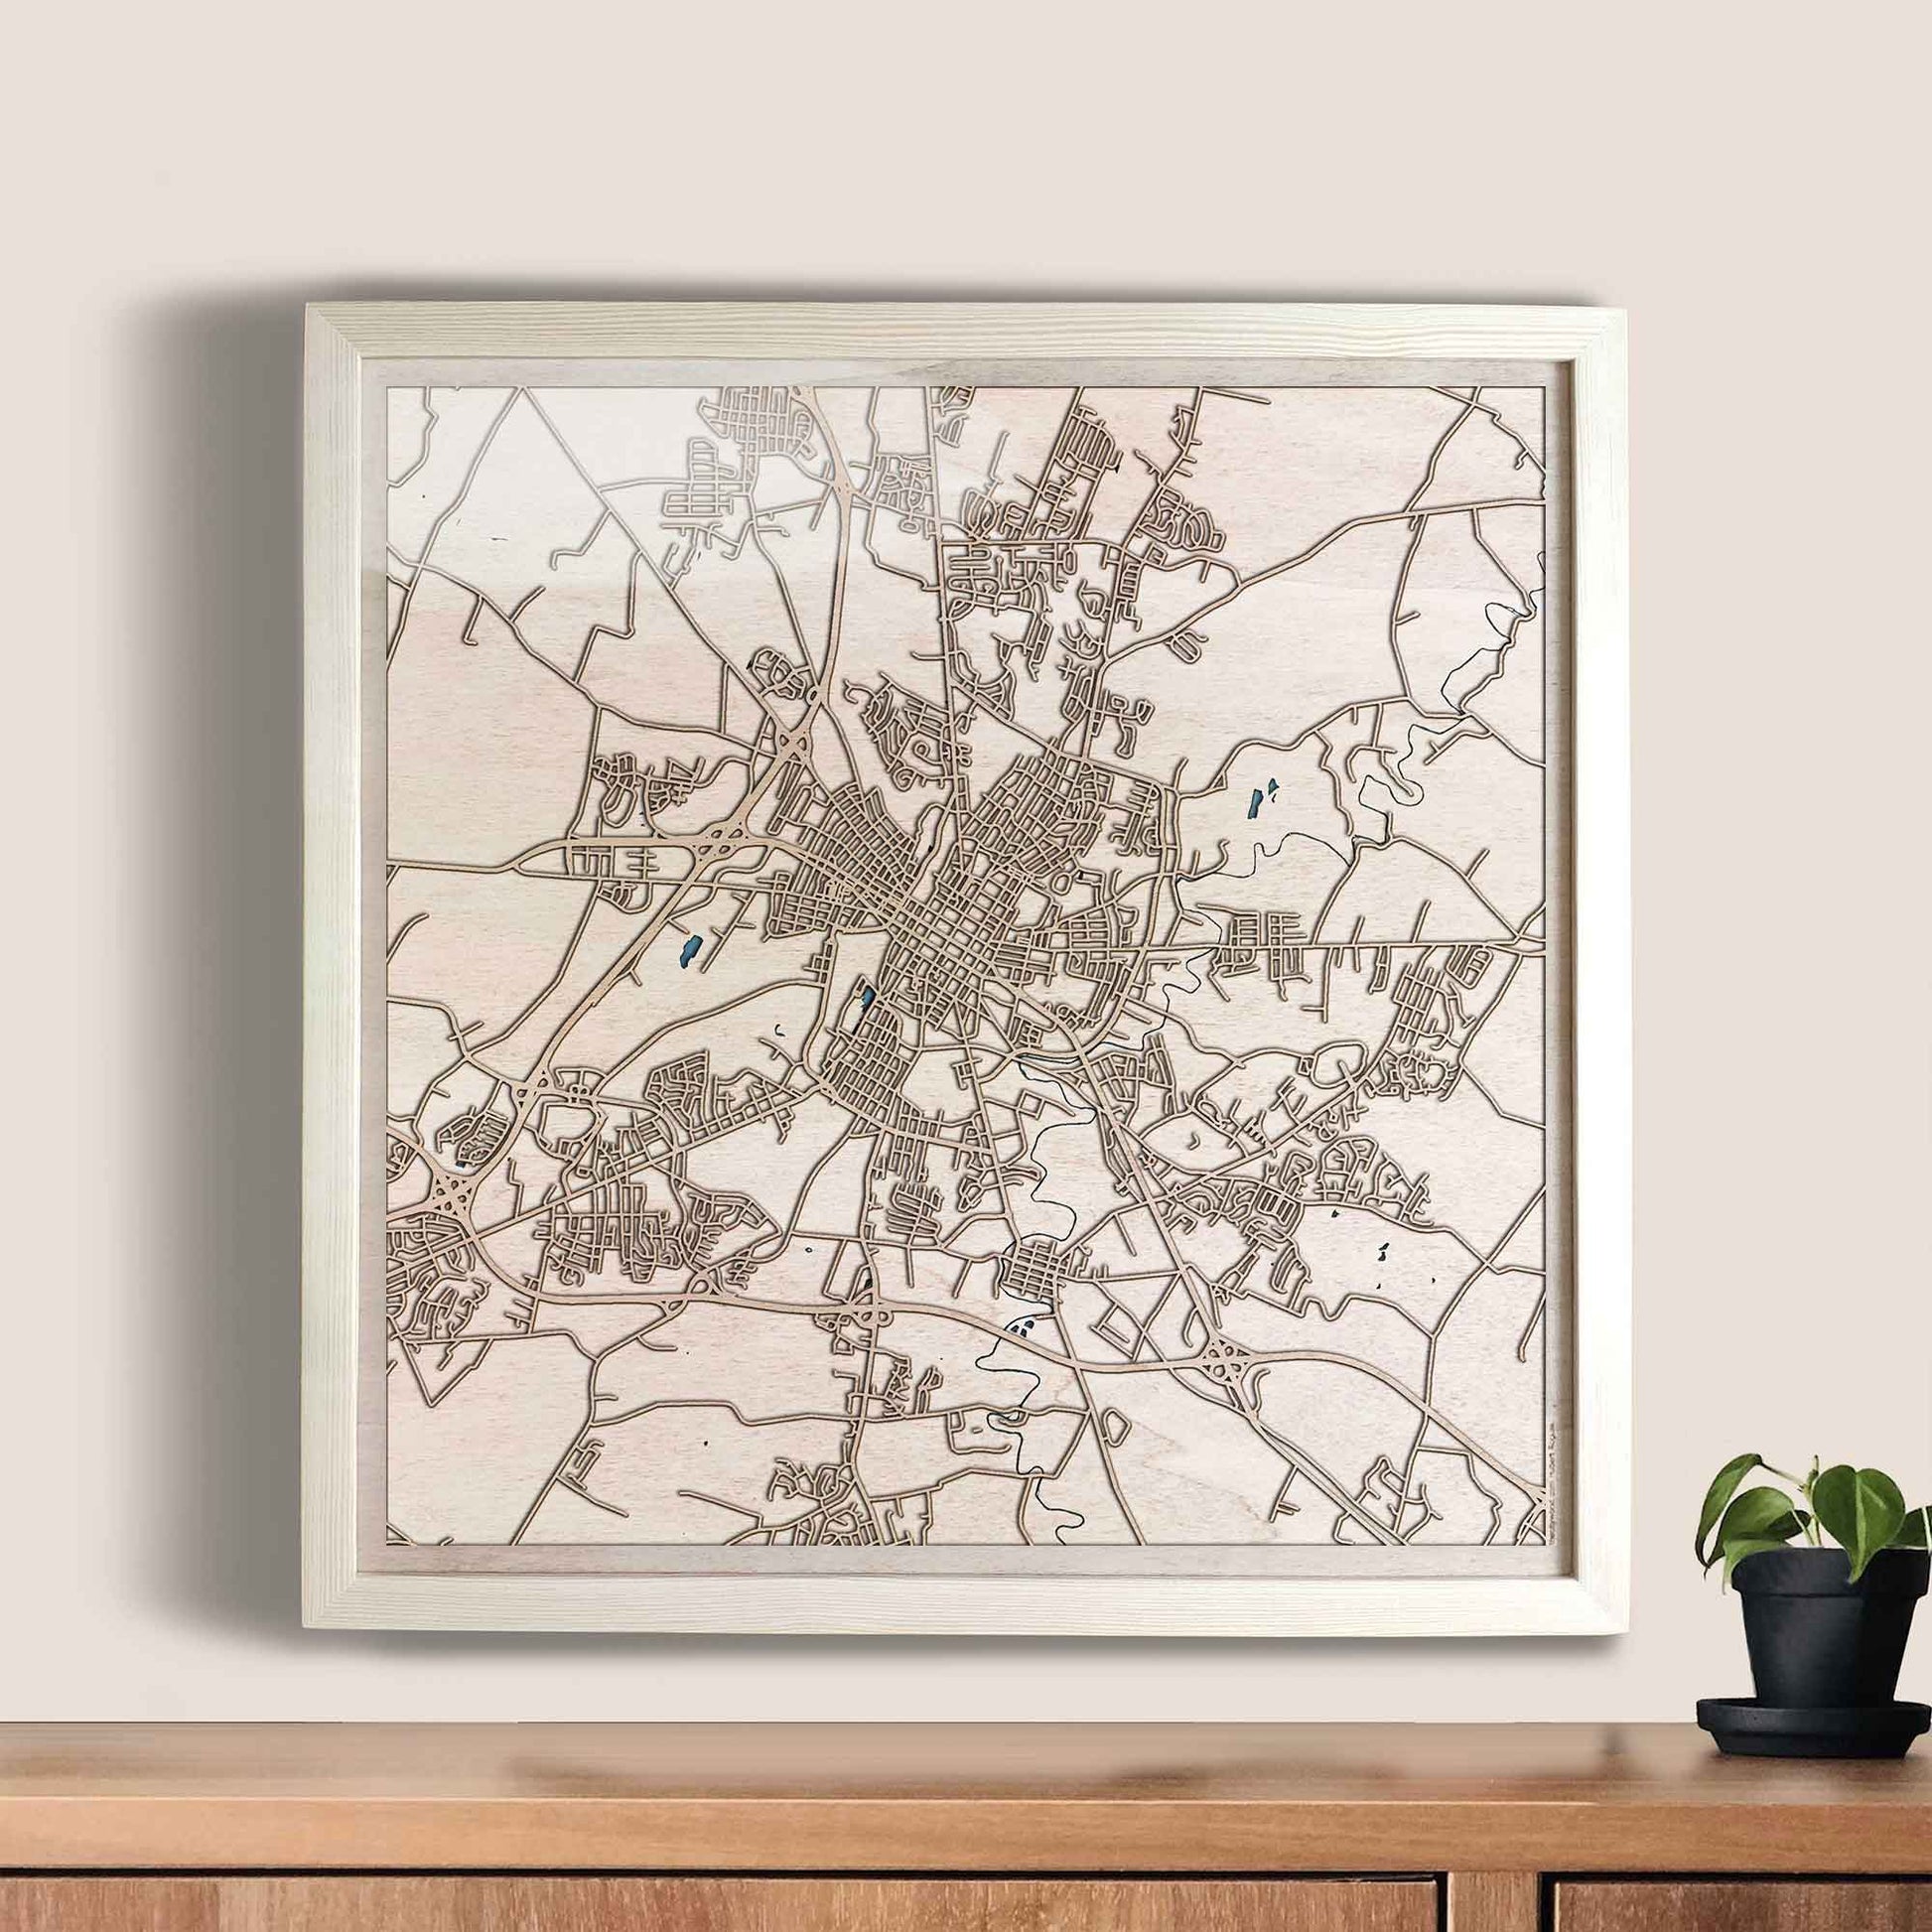 Hagerstown Wooden Map by CityWood - Custom Wood Map Art - Unique Laser Cut Engraved - Anniversary Gift